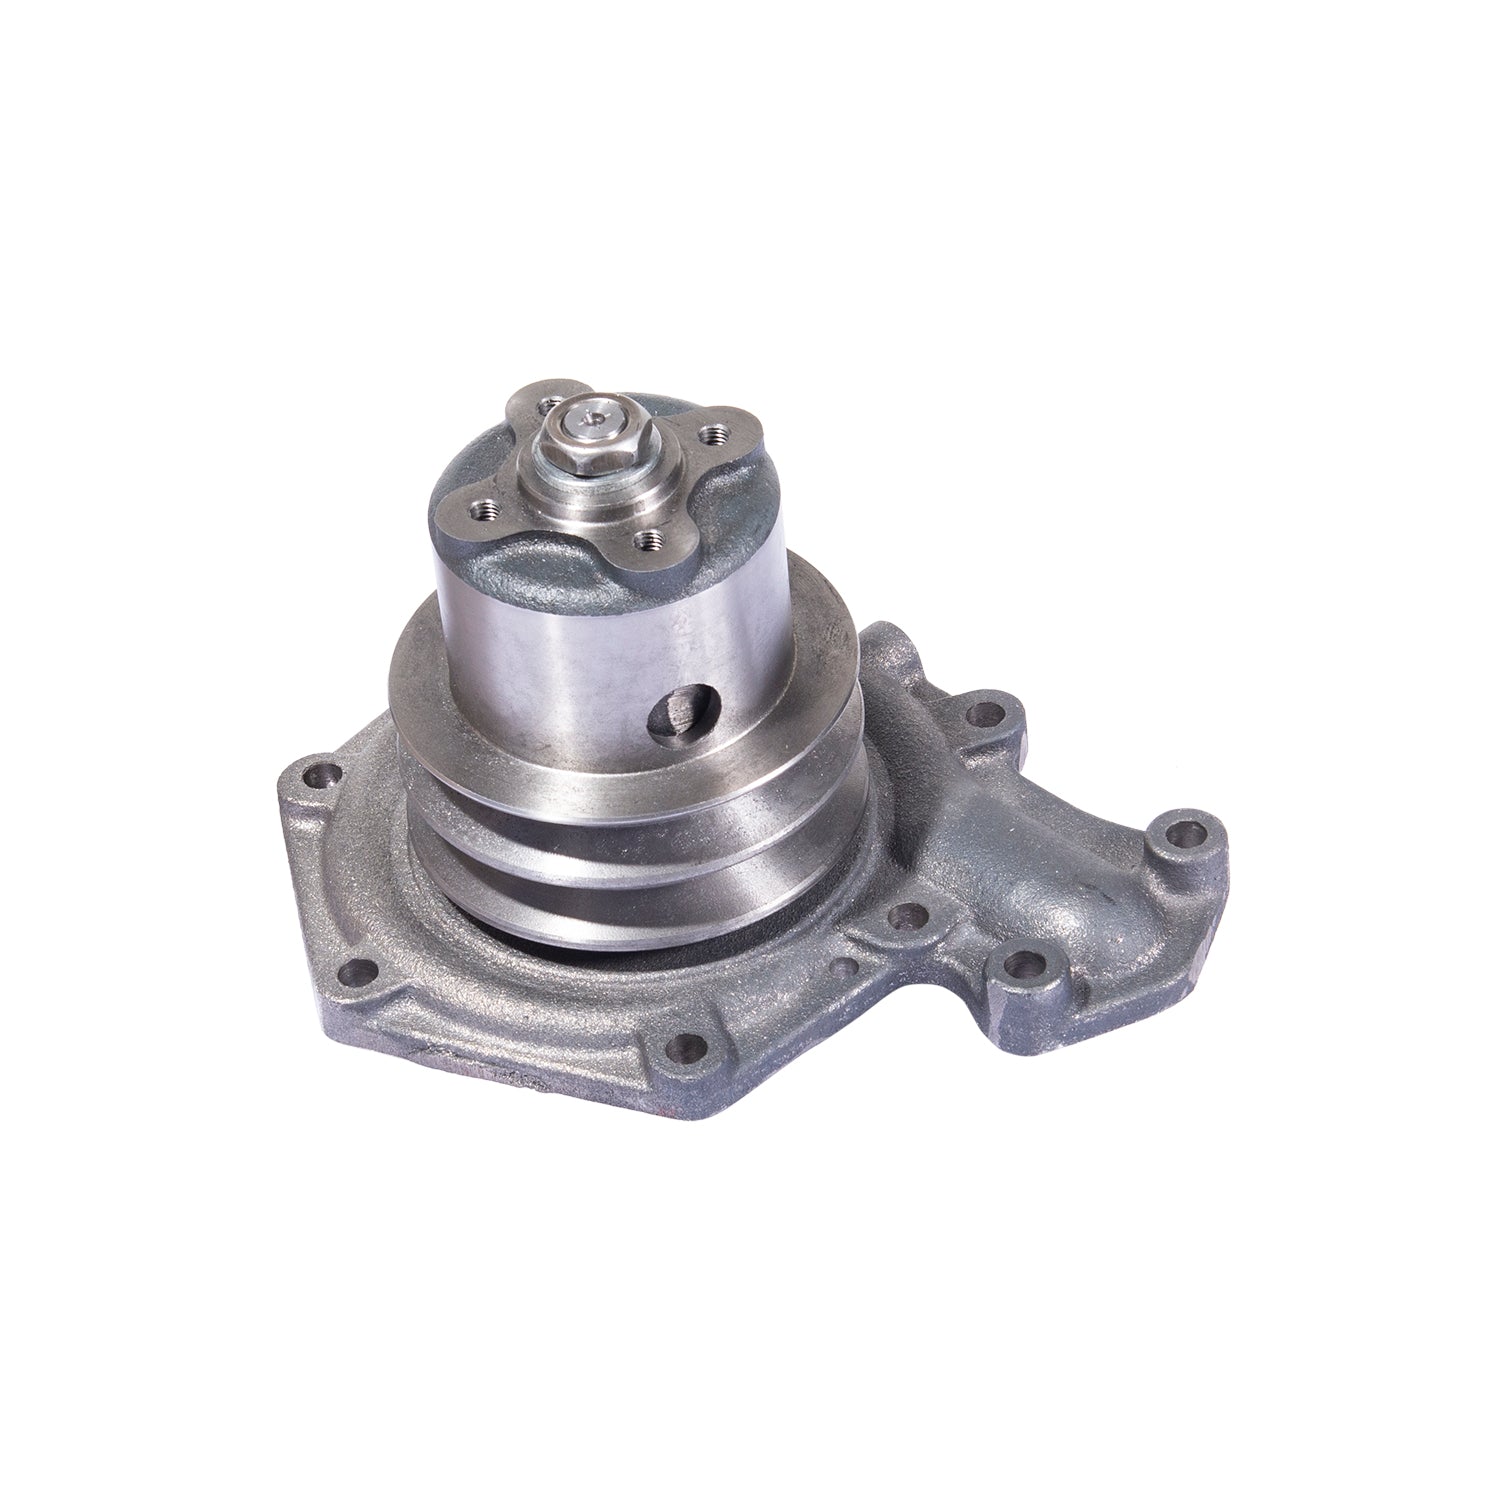 Water Pump Replacement for Hanomag Tractor; R 450, R 455, R 460 1550142830000